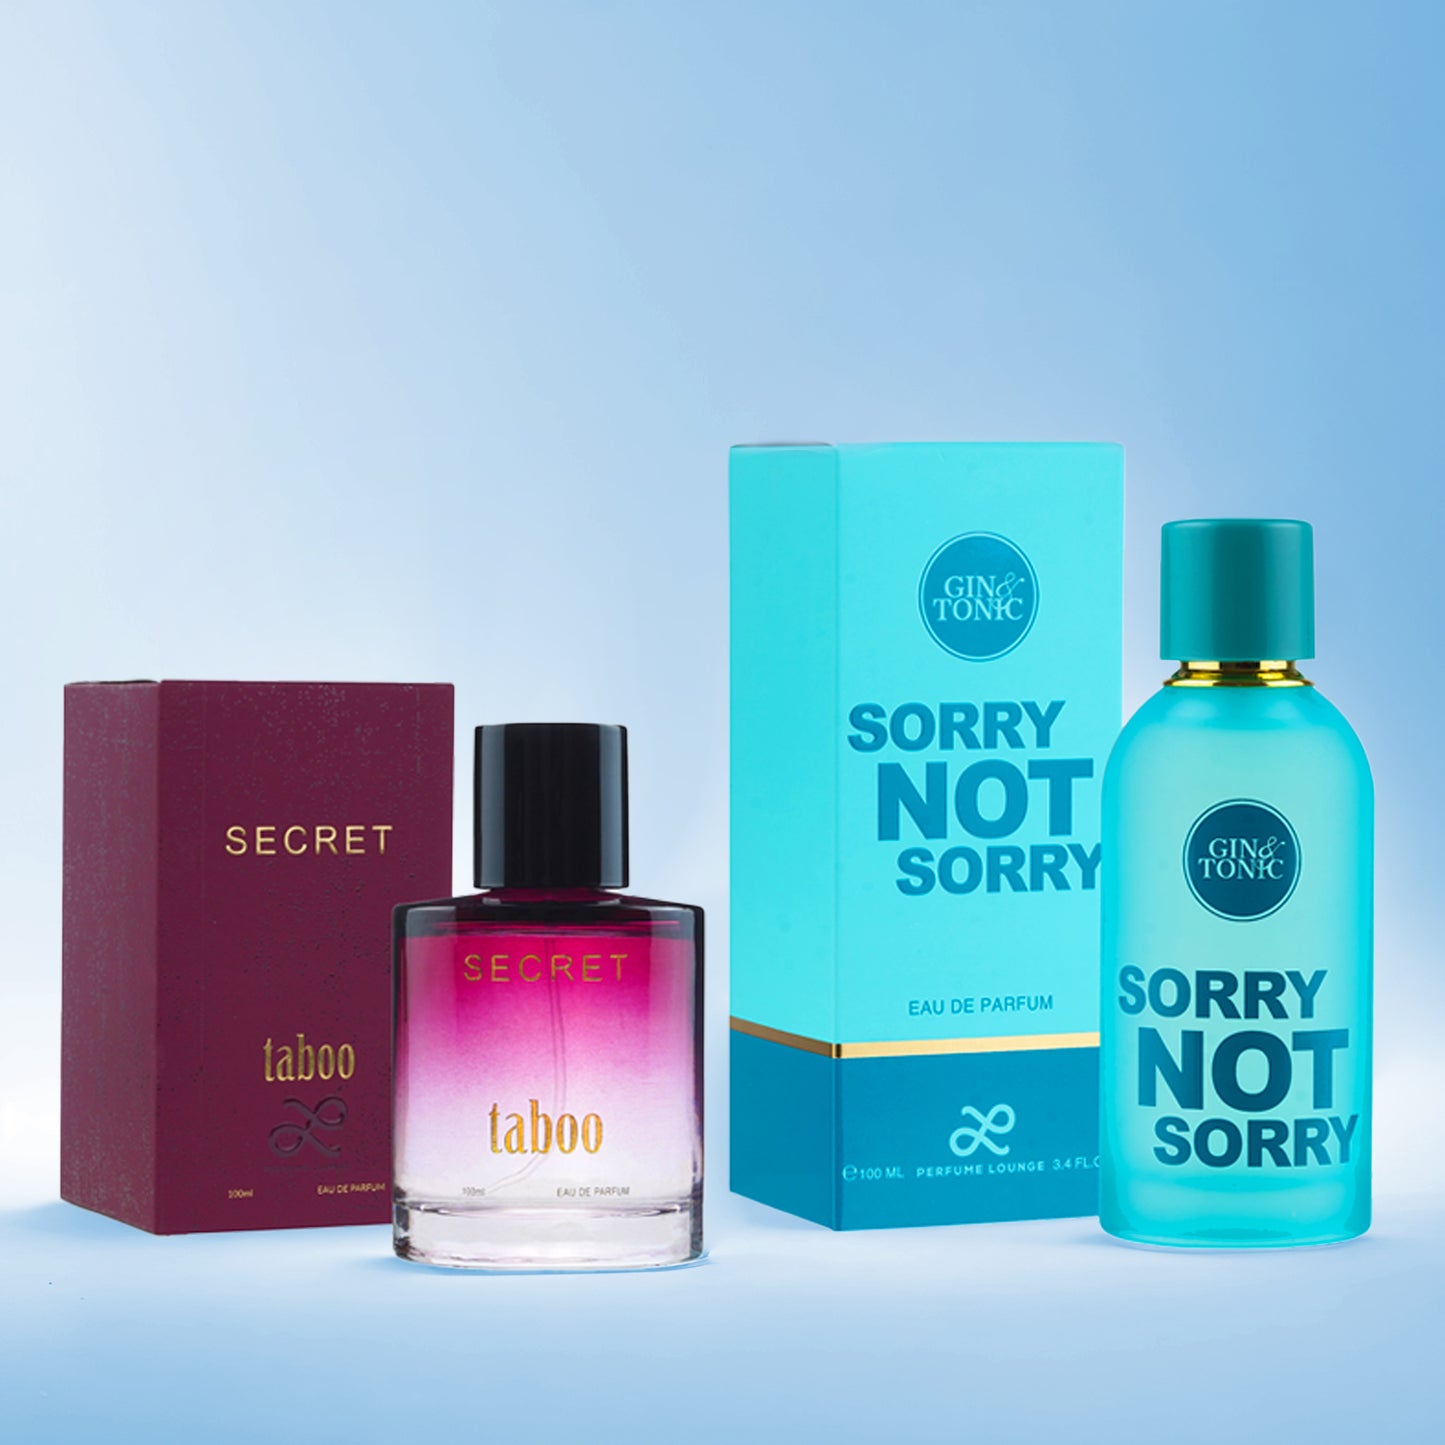 Gin & Tonic-Sorry not Sorry and Taboo Secret By Perfume Lounge For Women (Pack of 2- 100ml each)